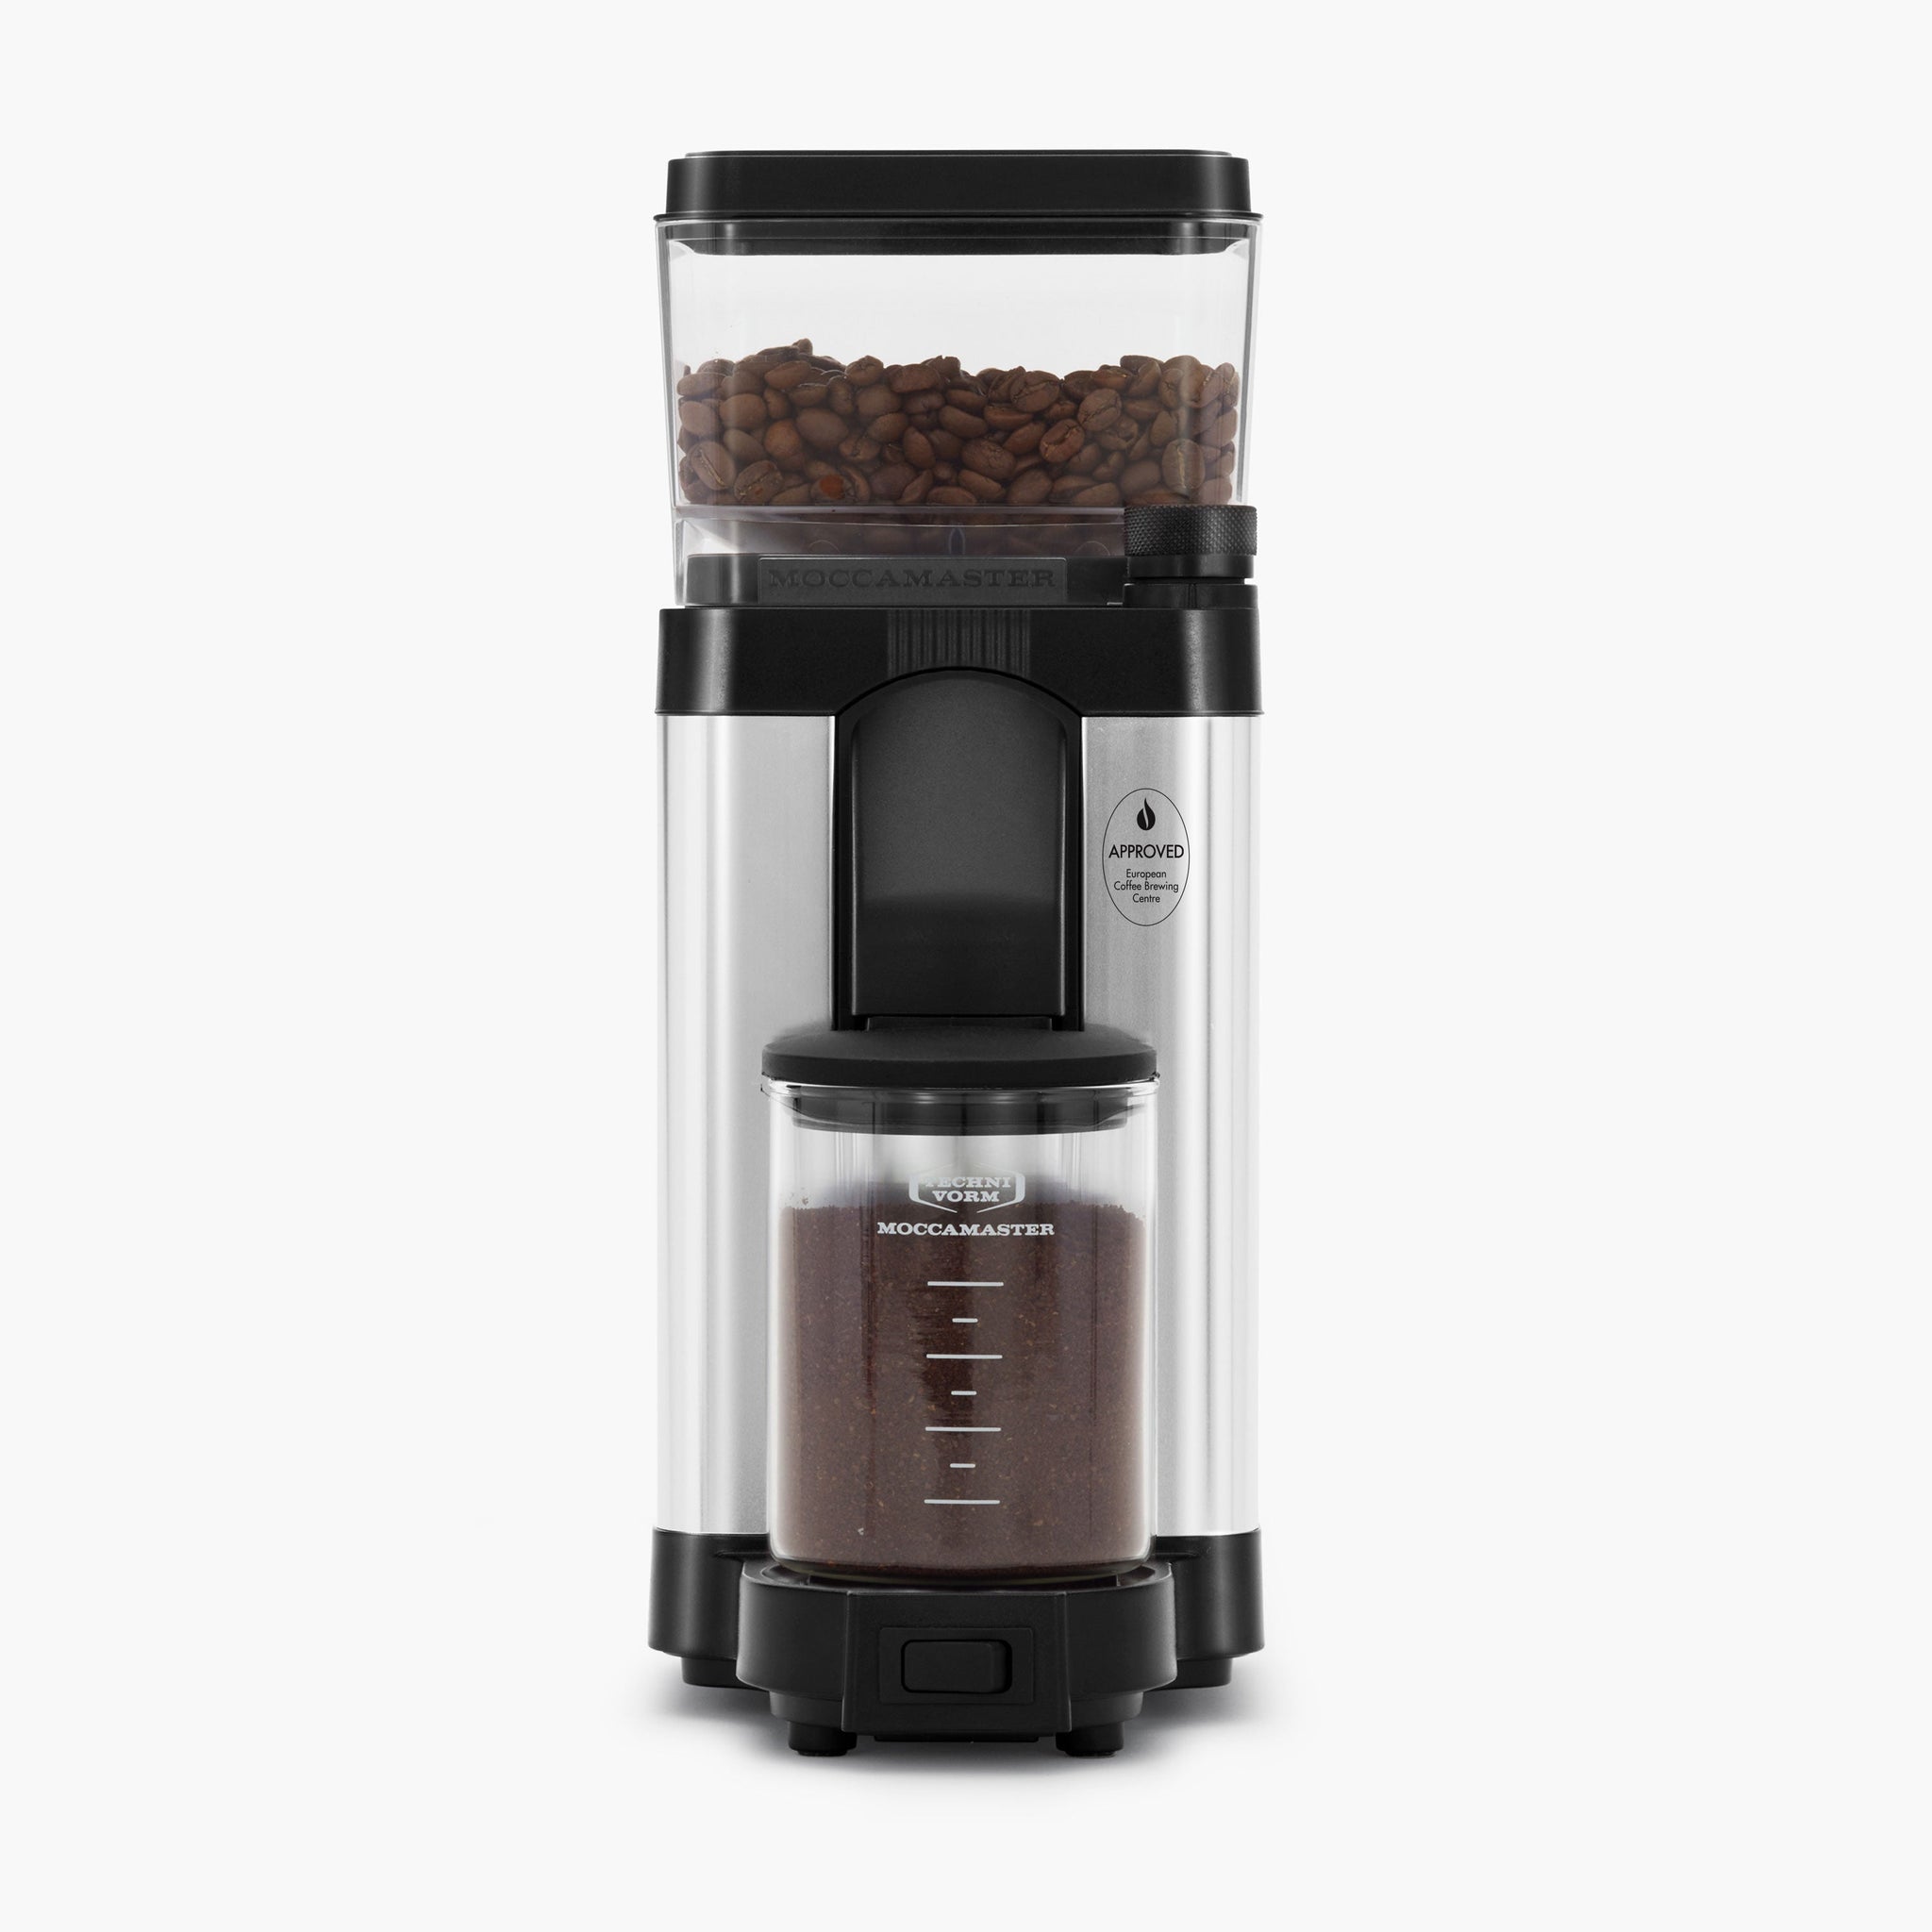 Is The Technivorm Moccamaster Worth It? It Makes Me Happy Every Day